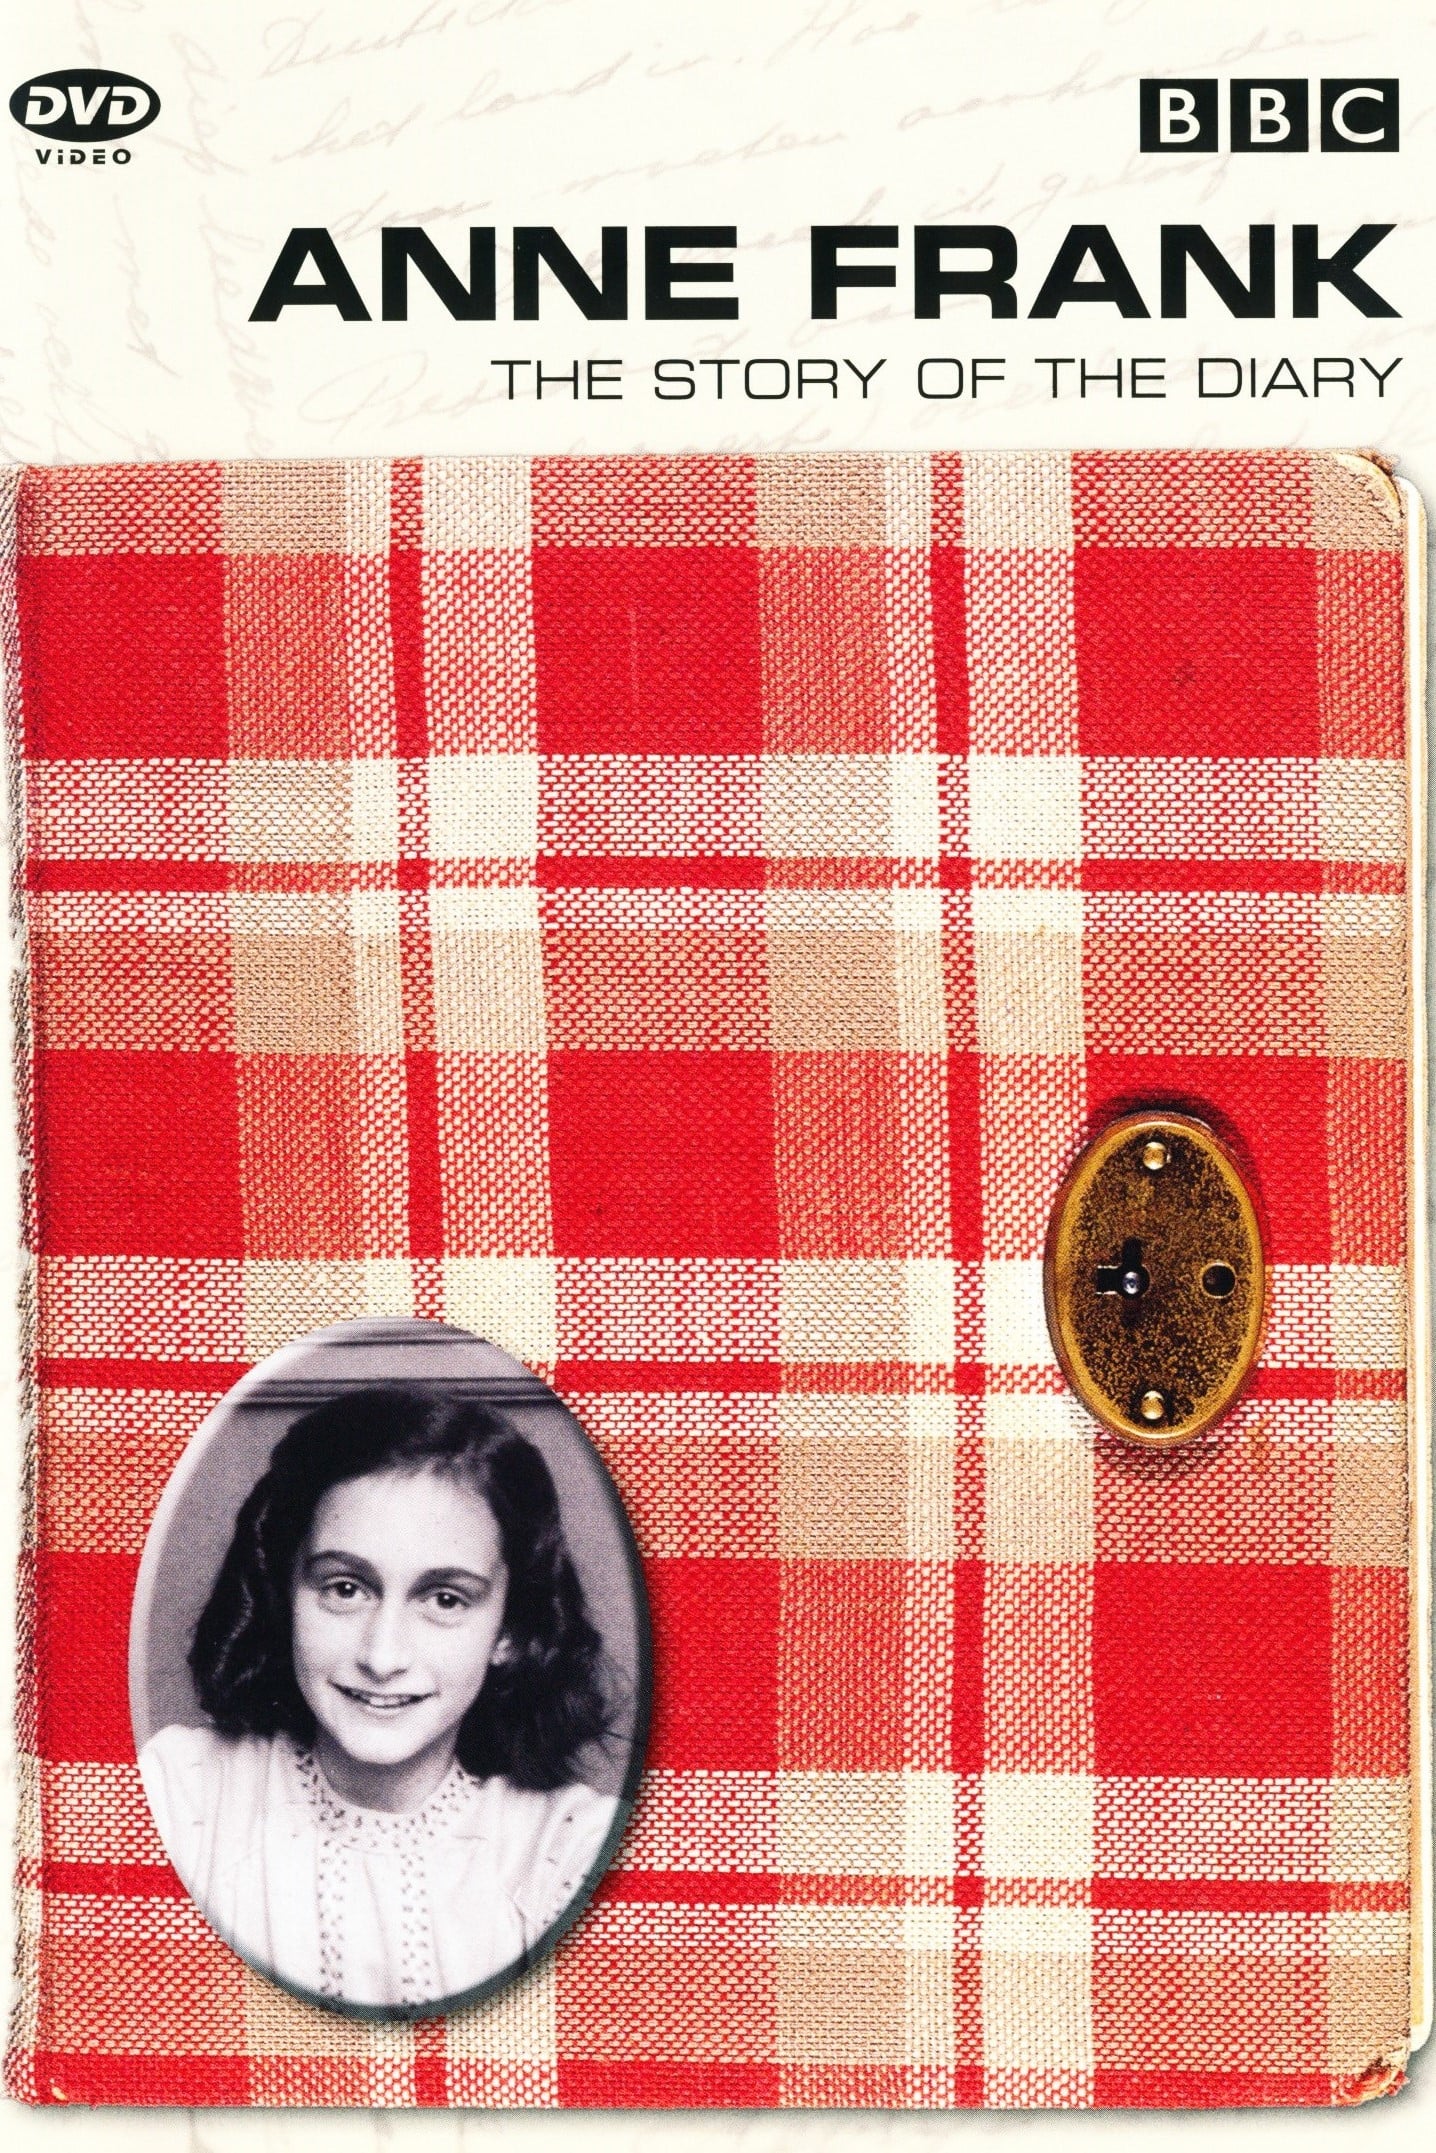 The Diary of Anne Frank (1987)